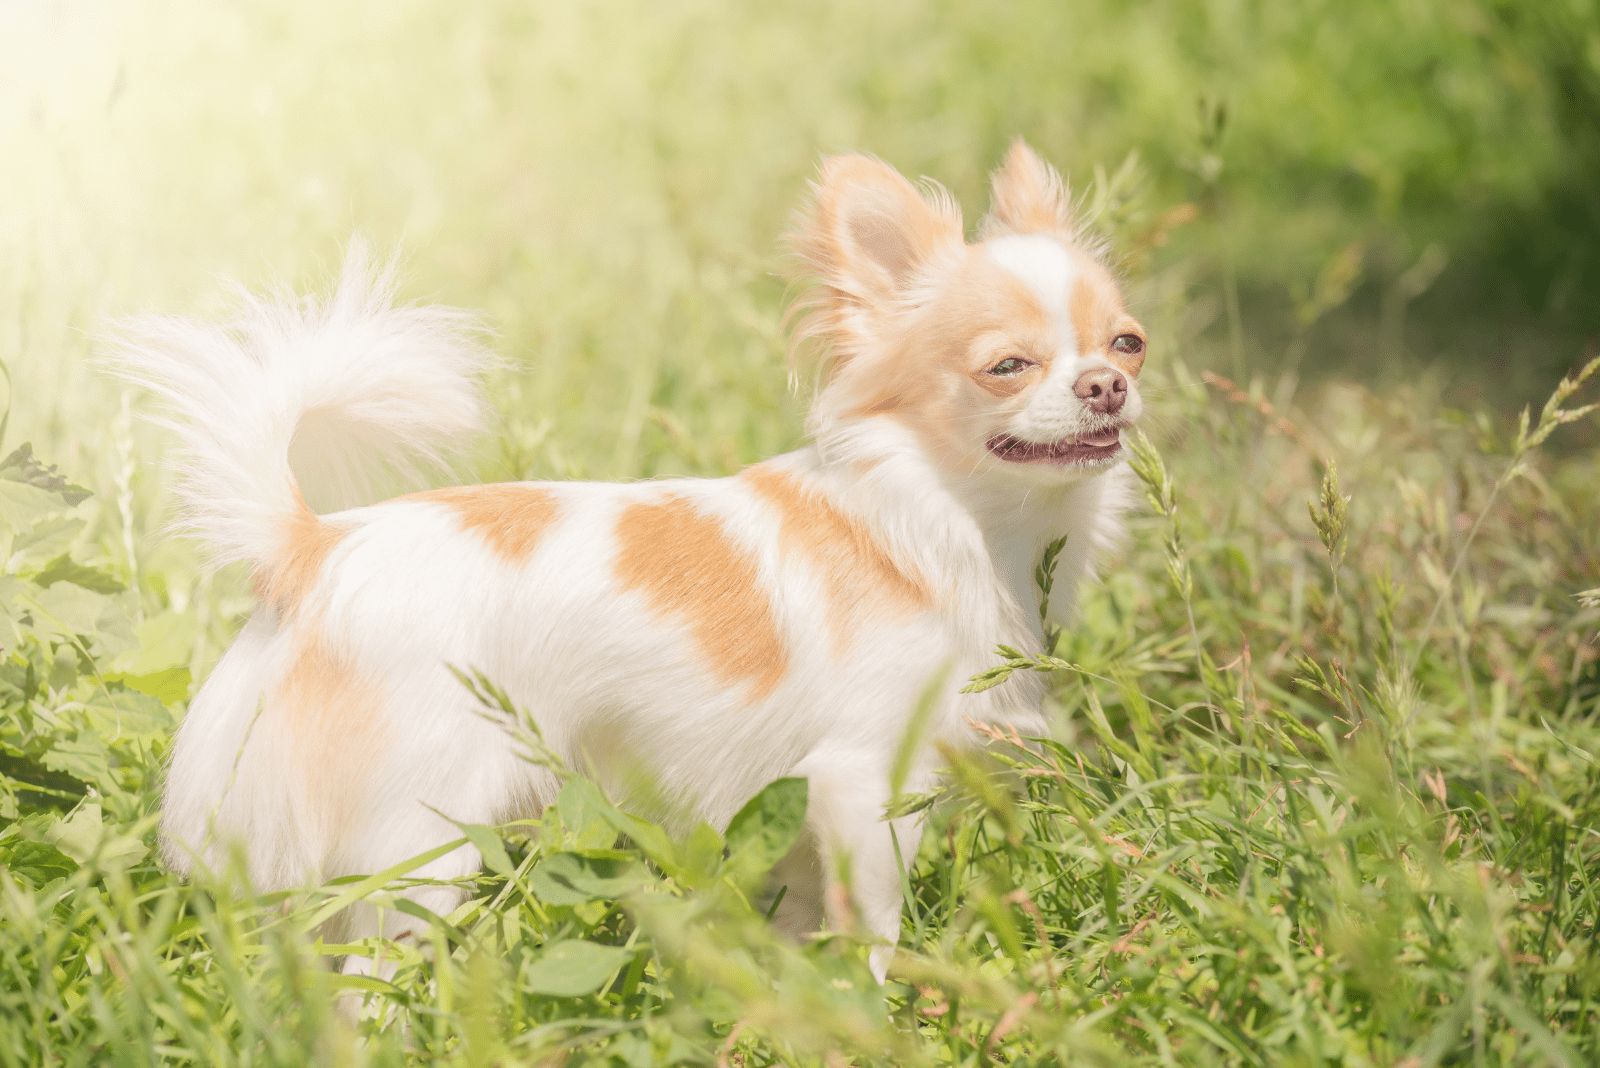 the long-haired chihuahua dog is white with red spots